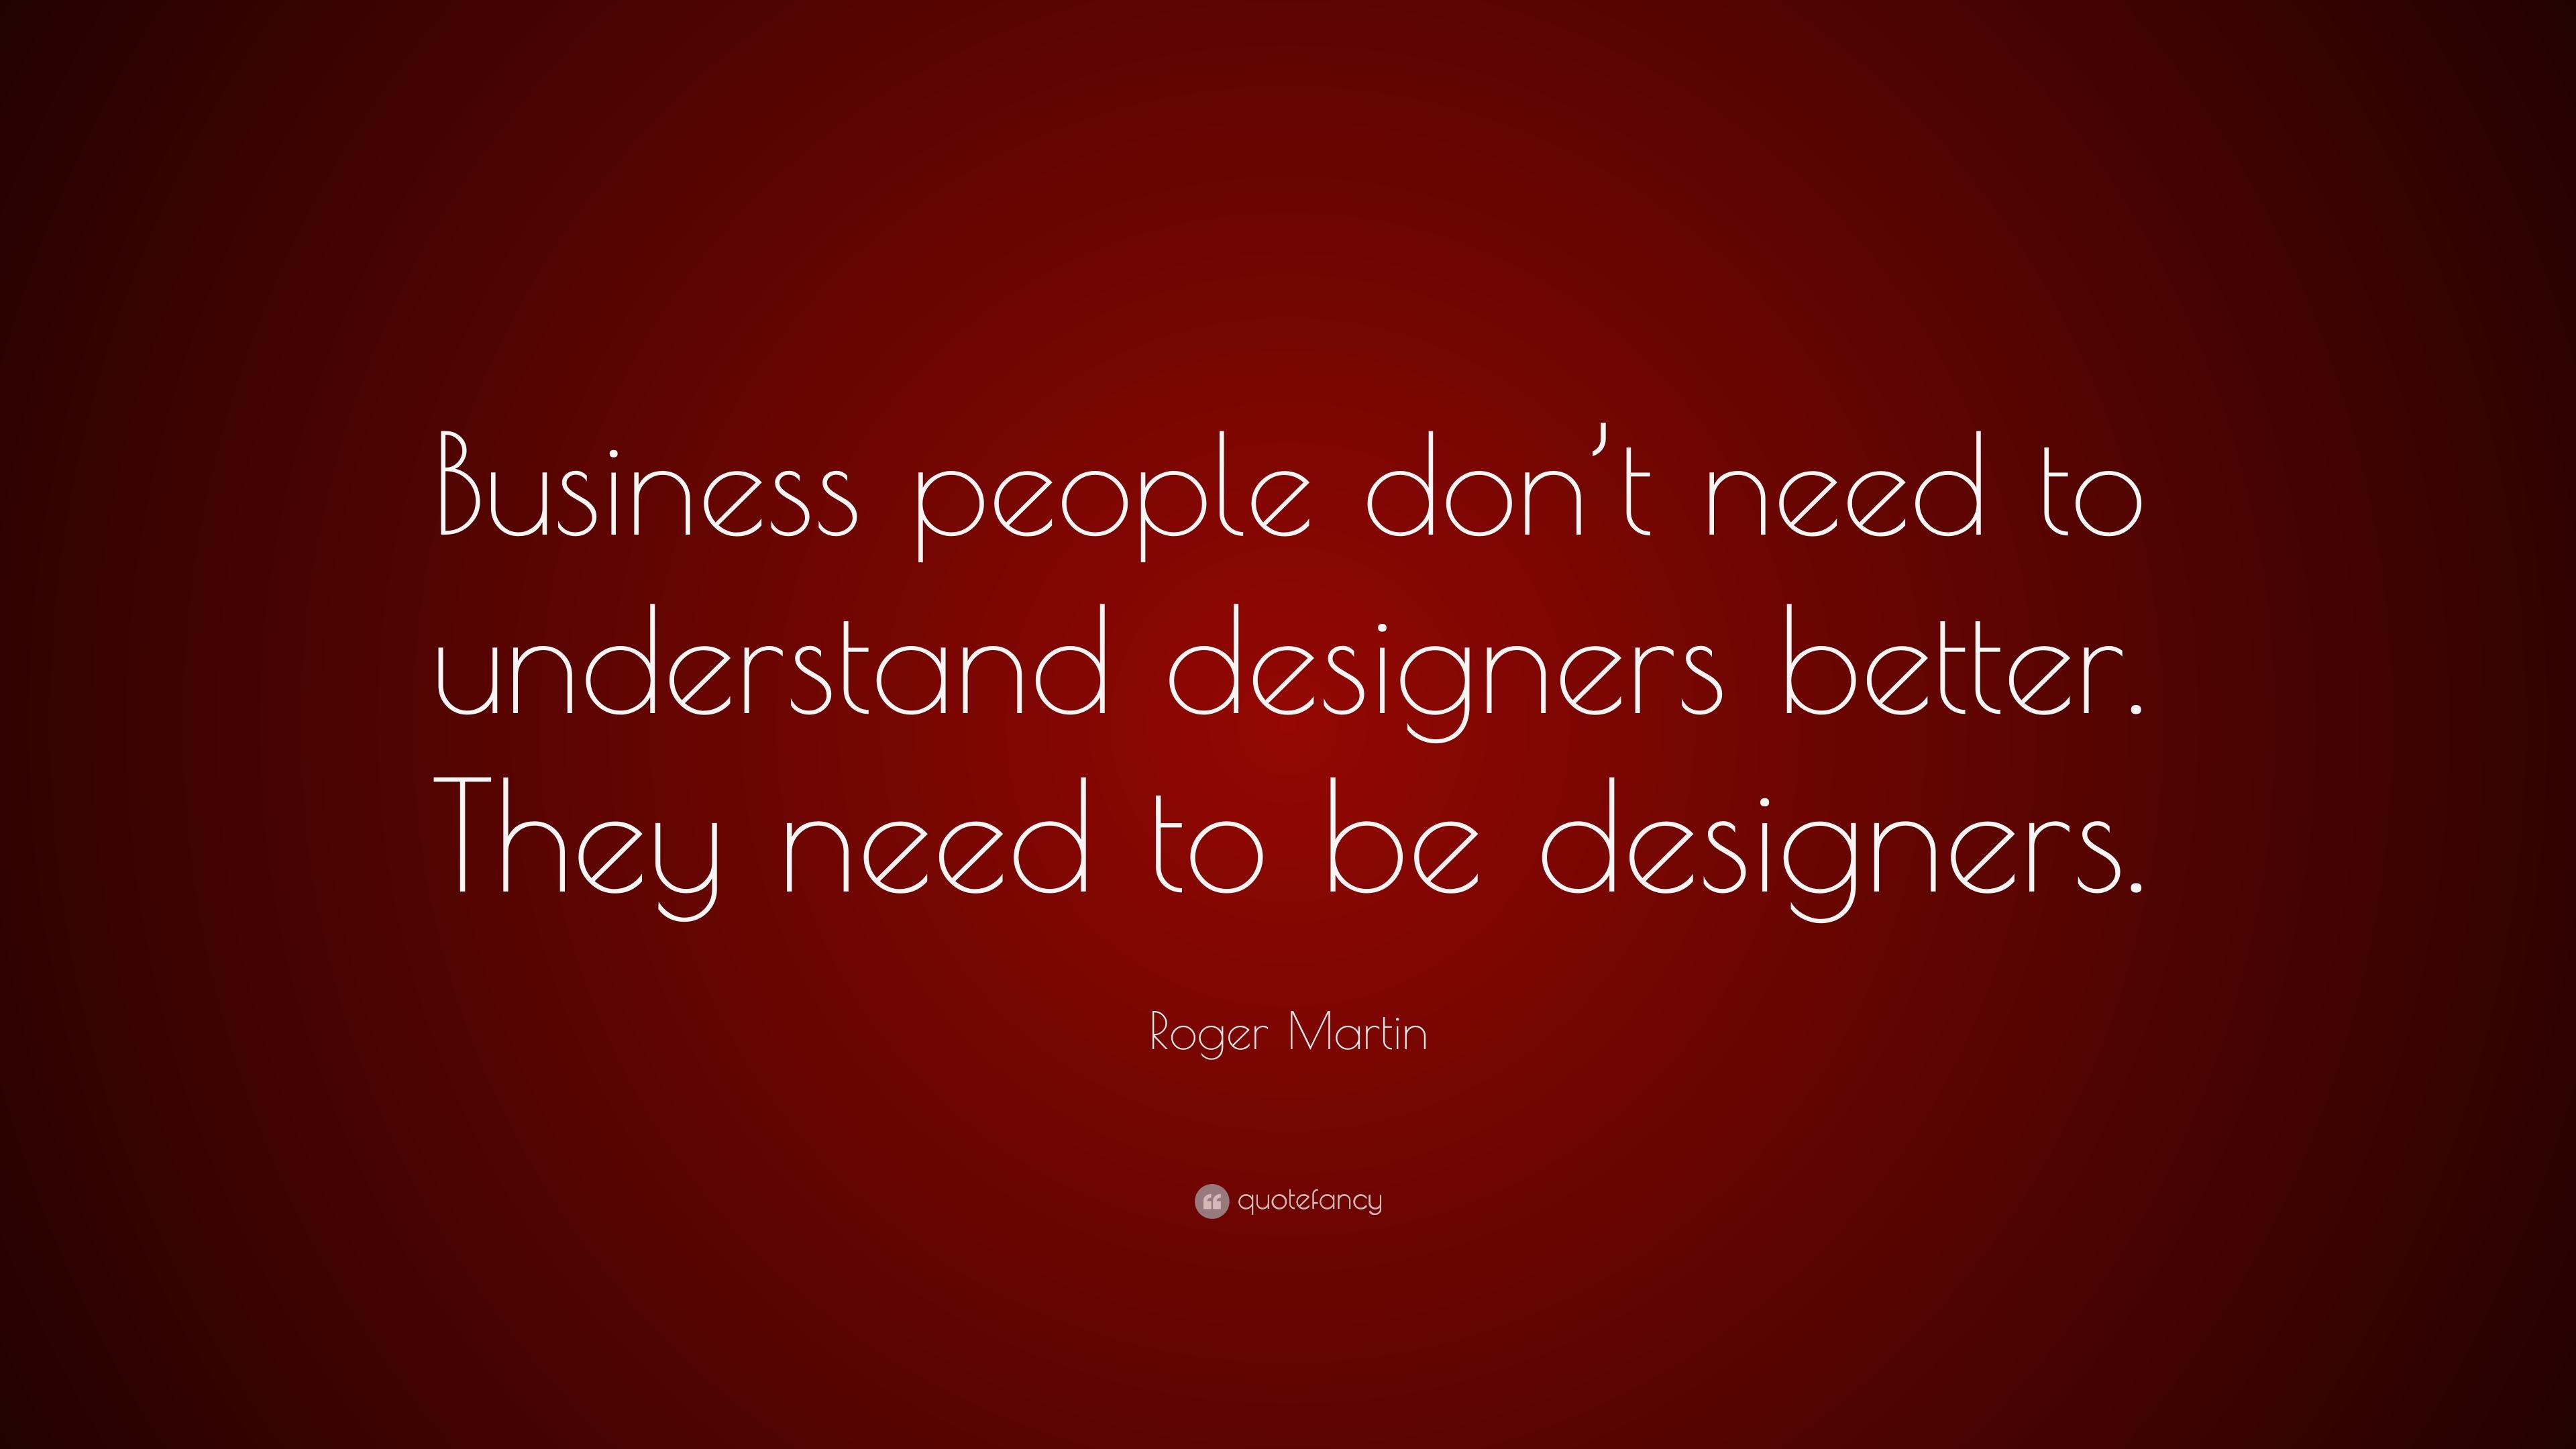 Roger Martin Quote: “Business people don't need to understand